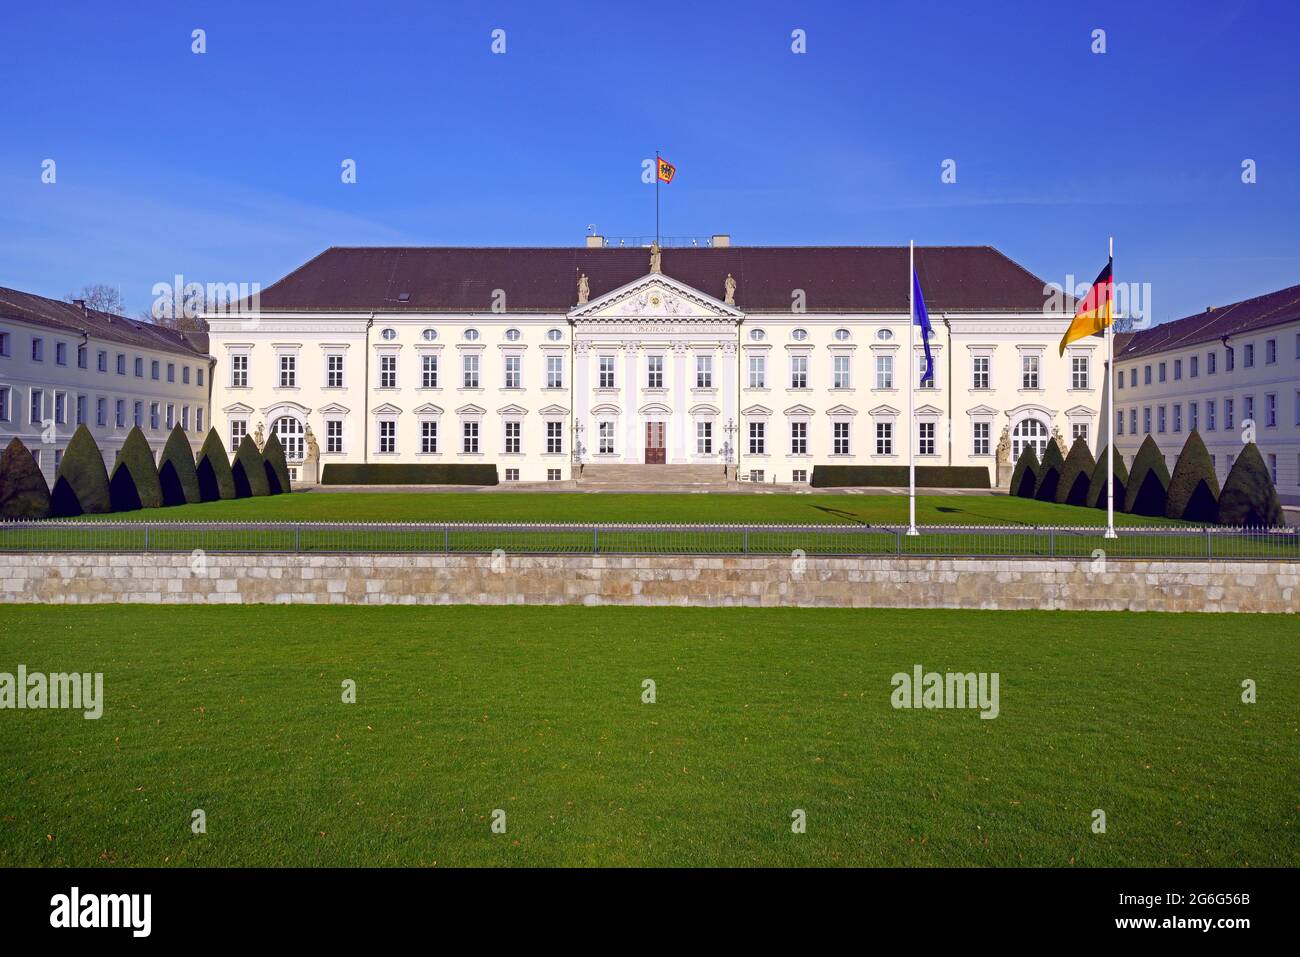 Bellevue Palace, official residence of the German Federal President , Germany, Tiergarten, Berlin Stock Photo